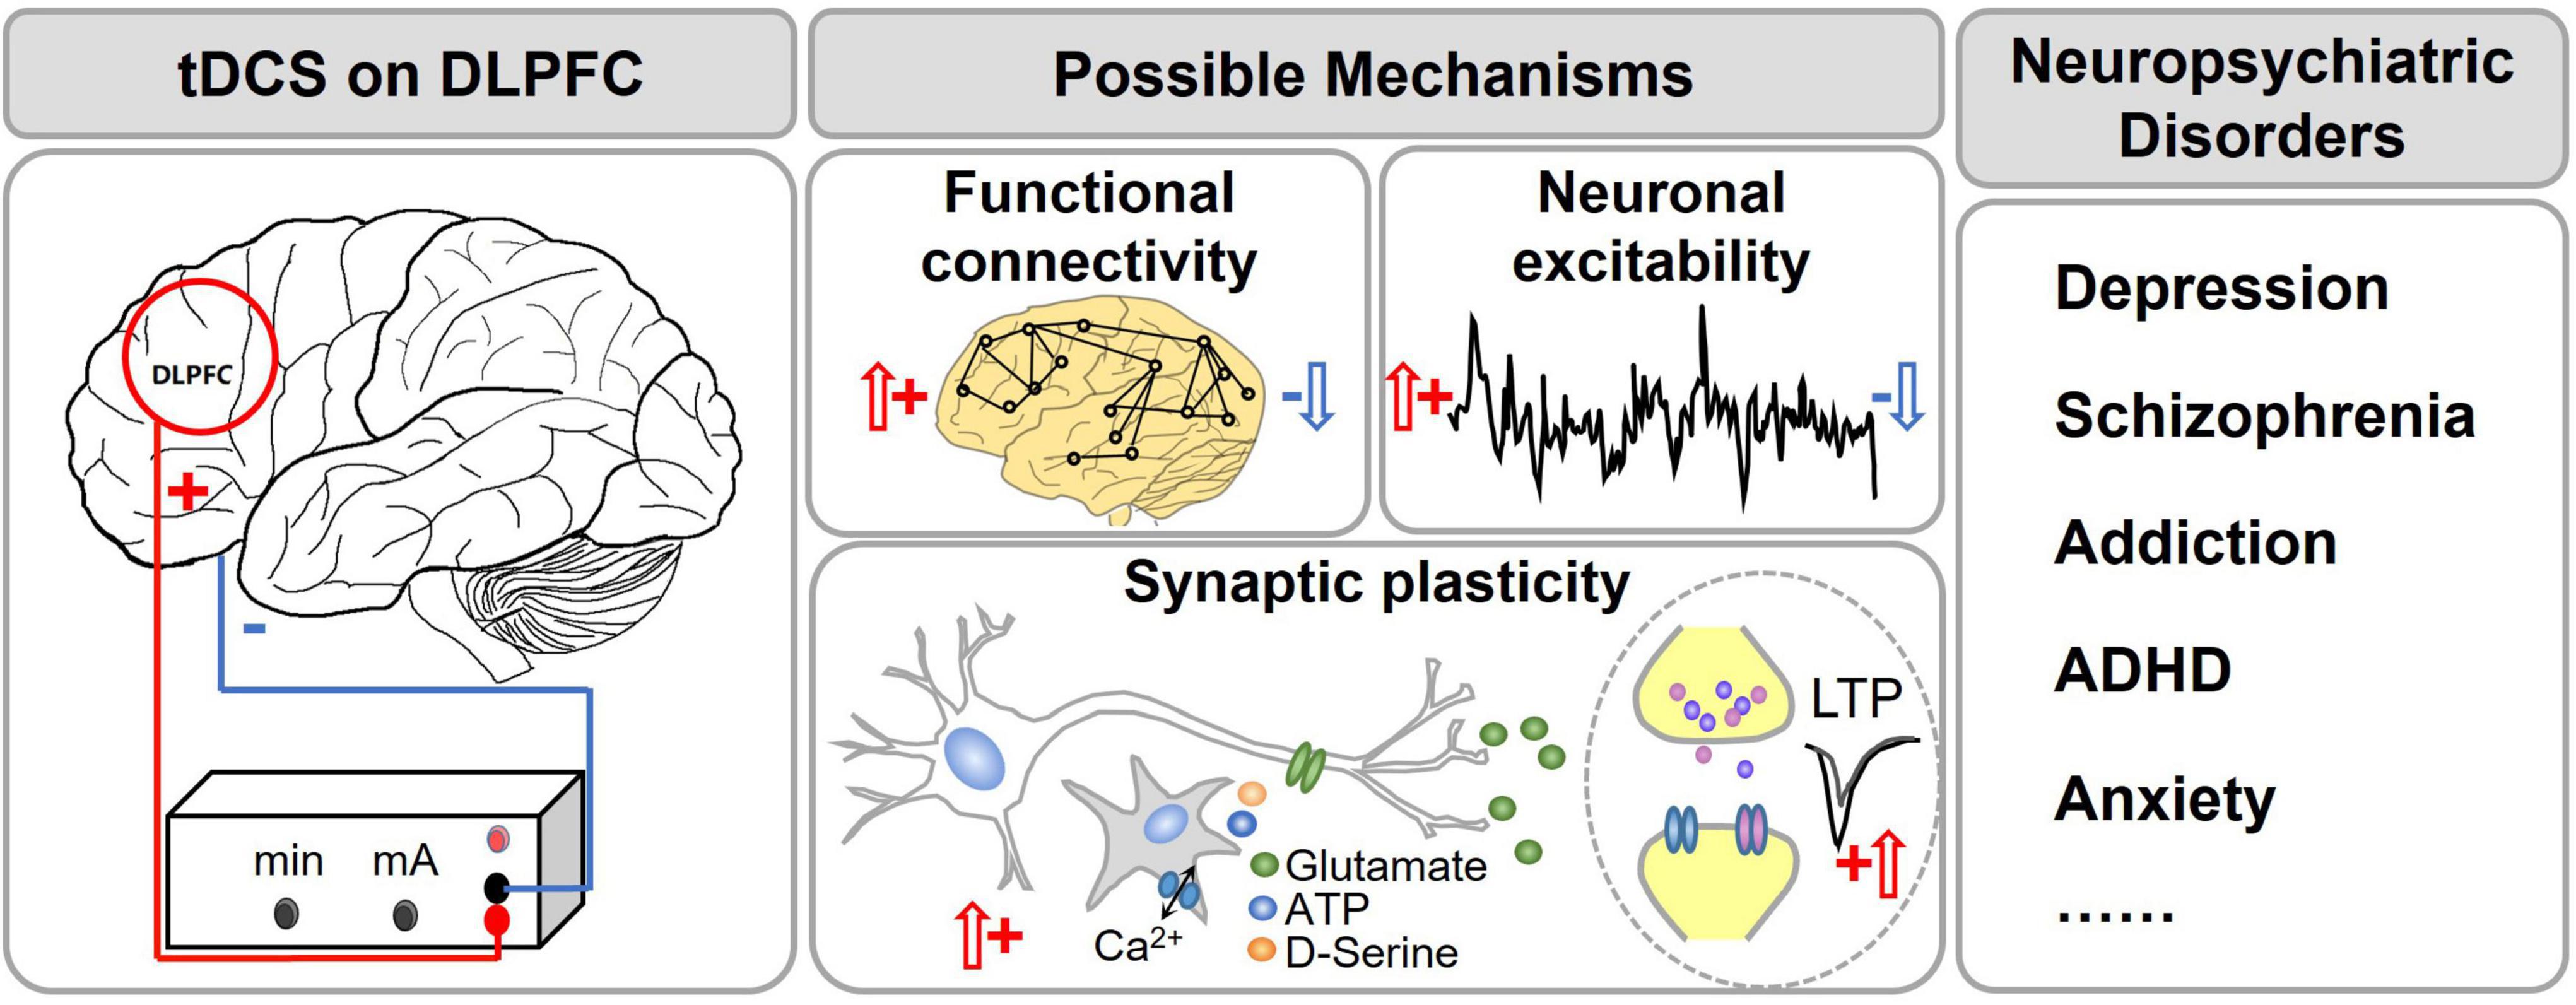 Frontiers Transcranial Direct Current Stimulation Of The Dorsolateral Prefrontal Cortex For